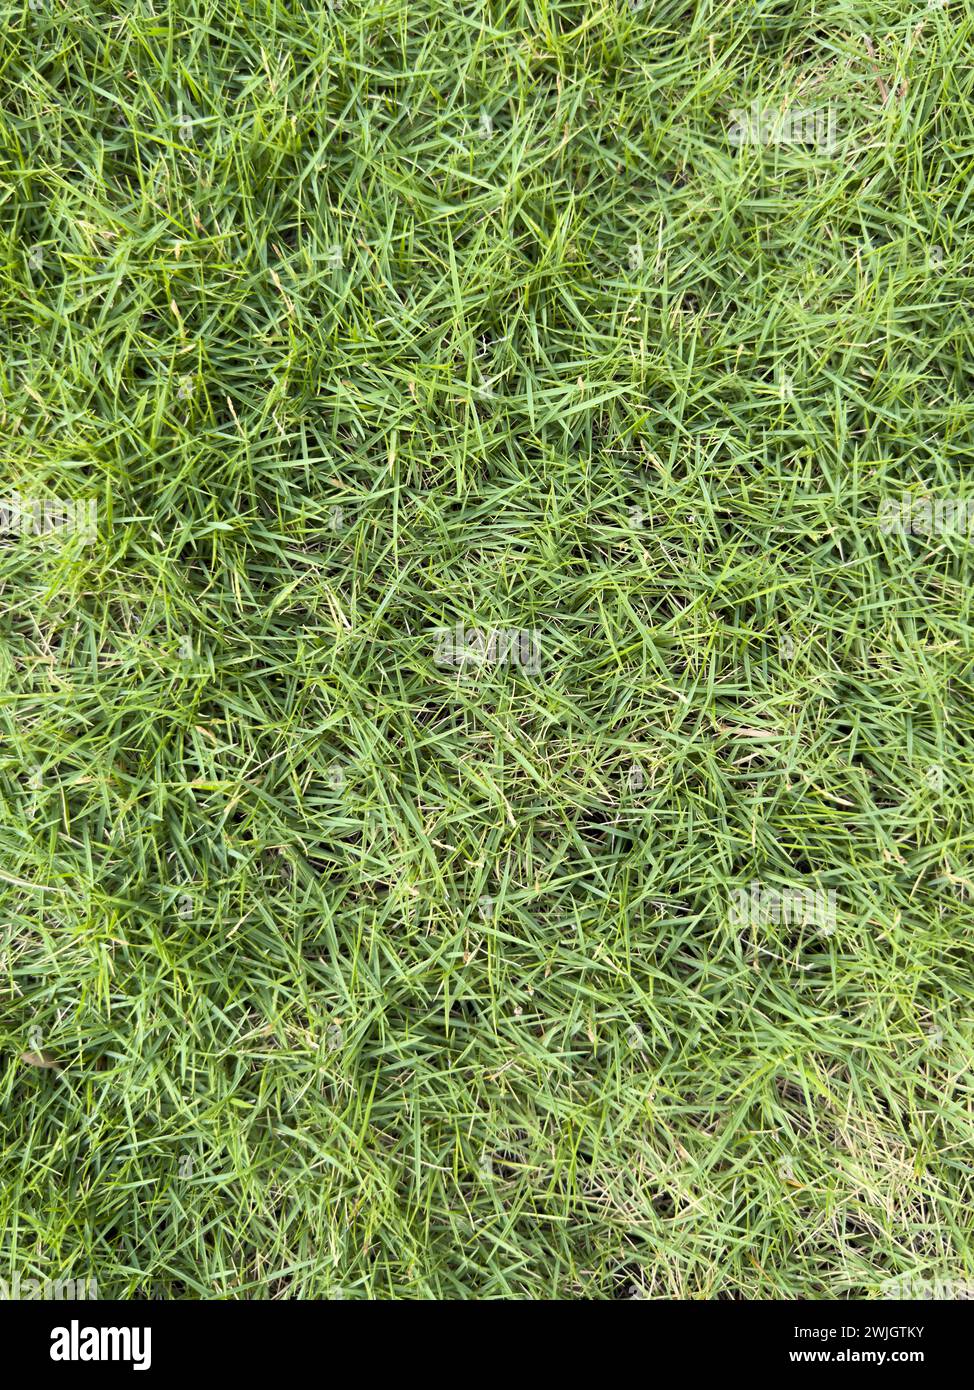 Soft fuzzy green grass texture background macro close up view Stock Photo